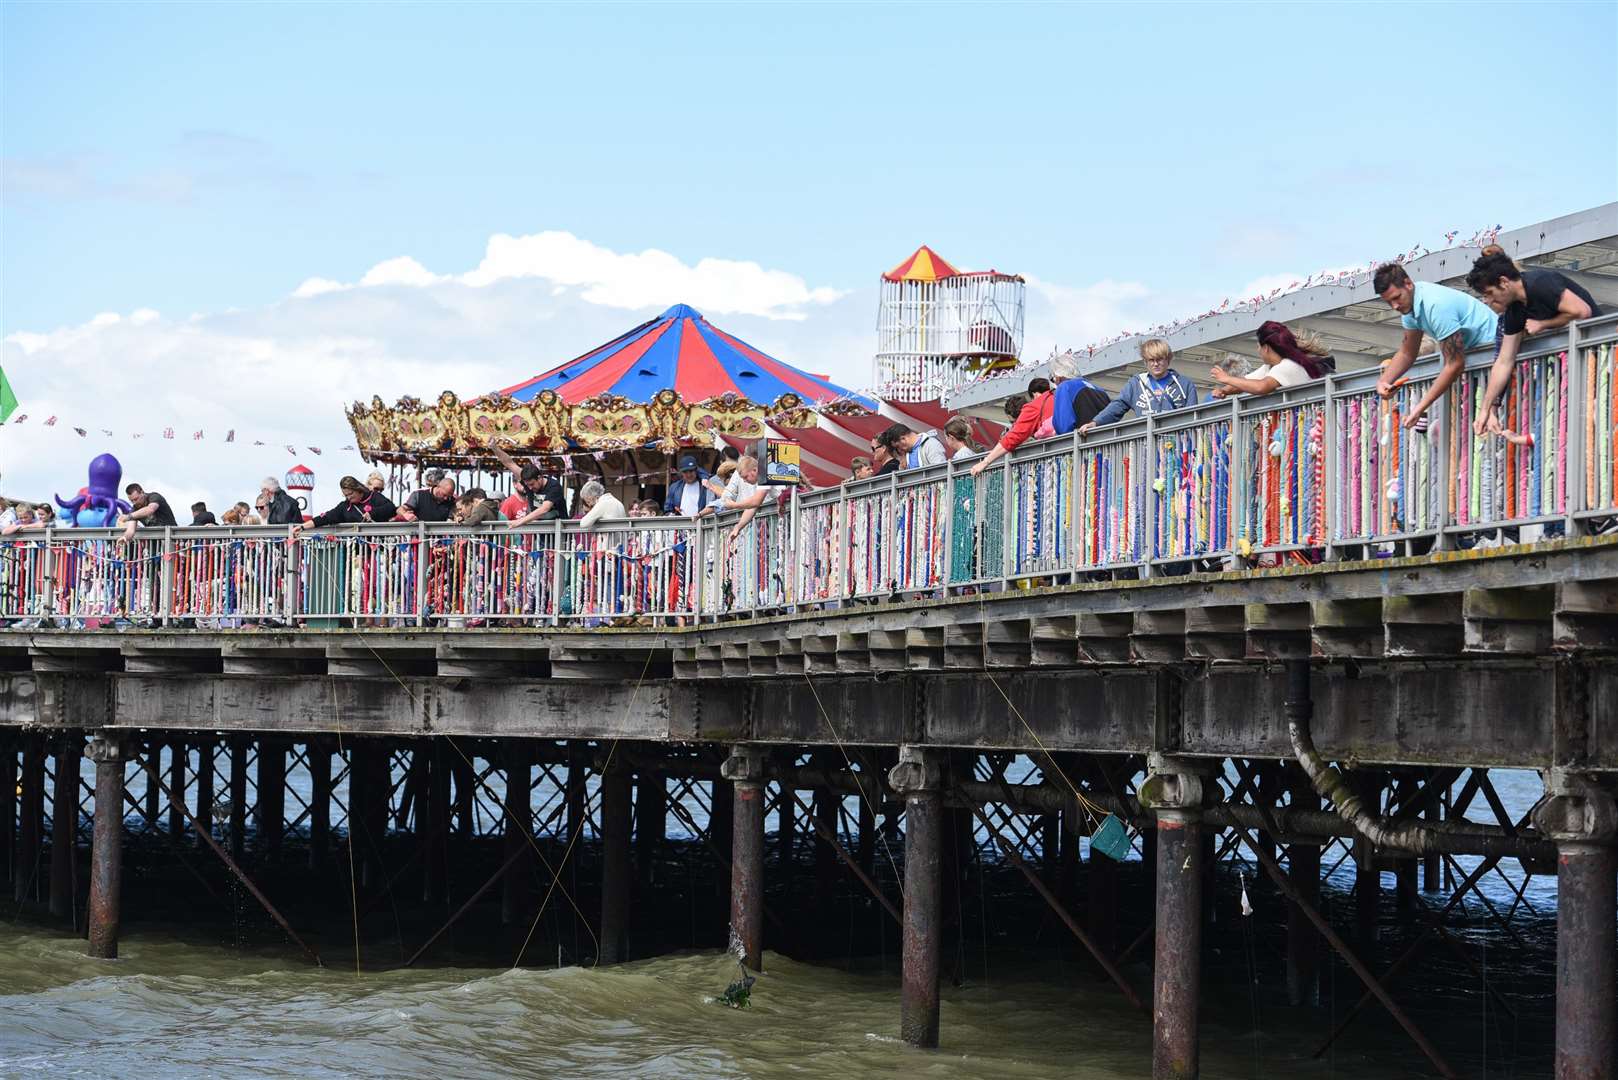 A crabbing competition held on the pier in 2016